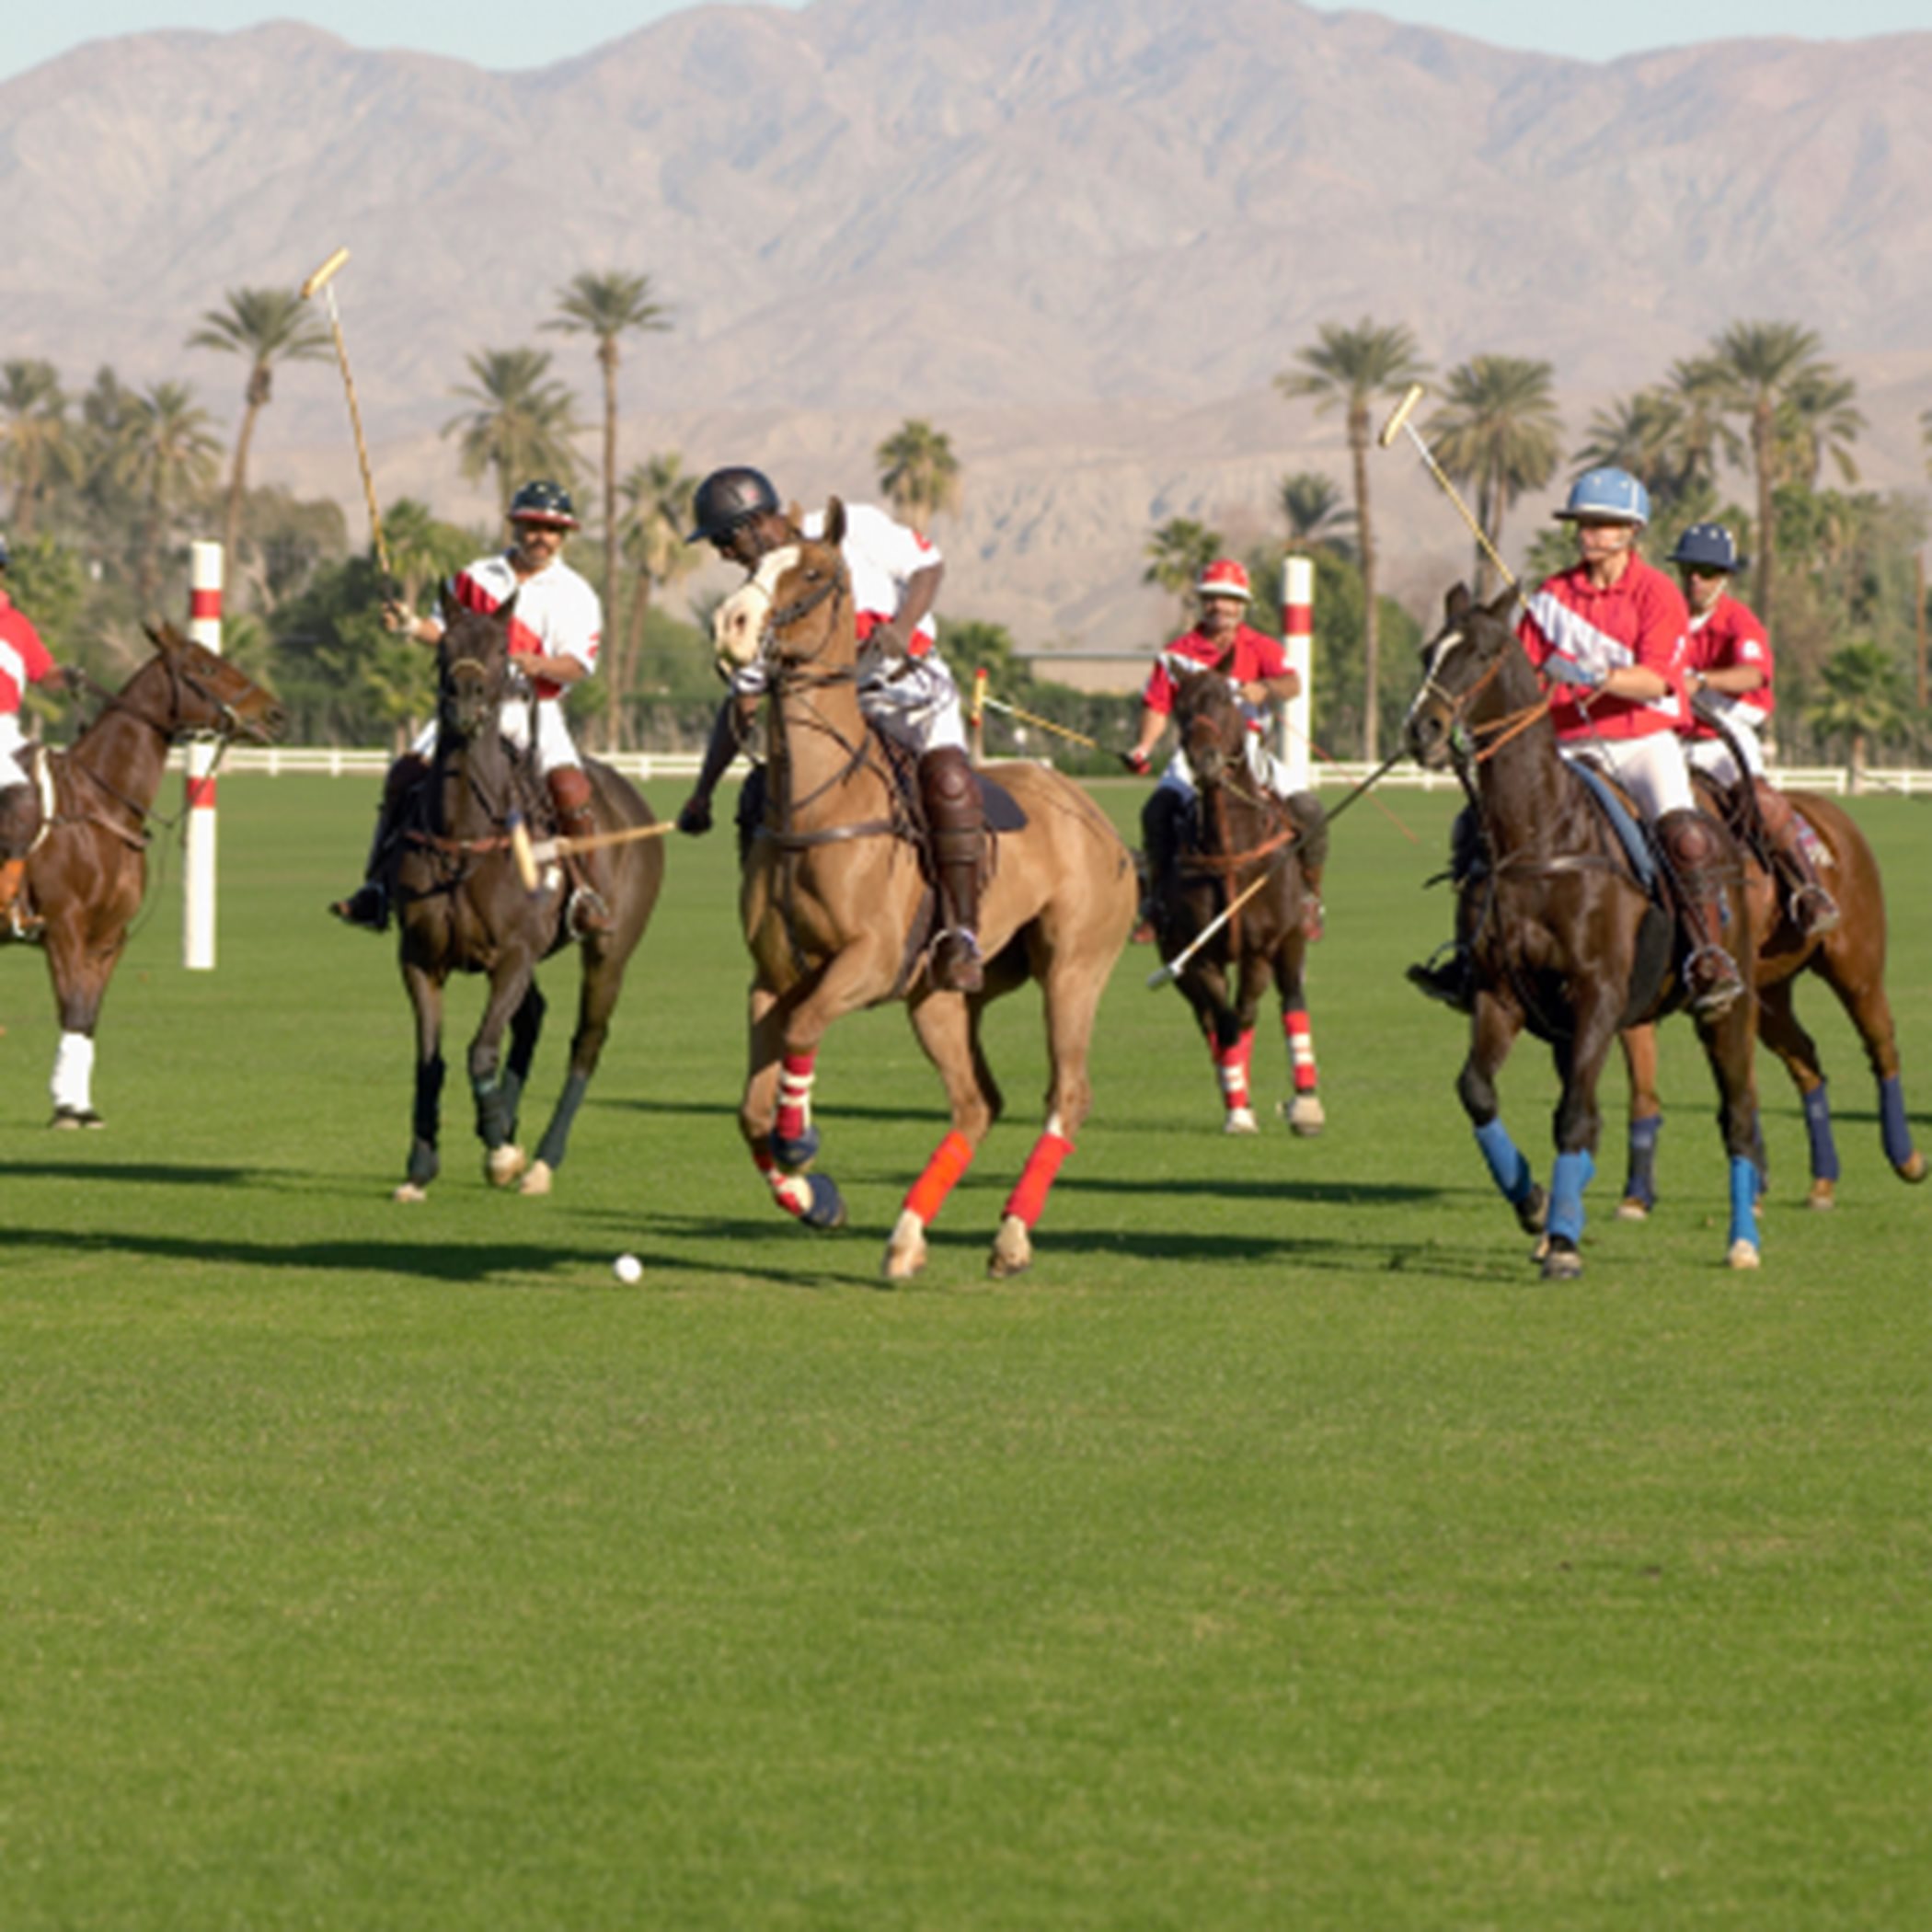 Group participating in a polo match